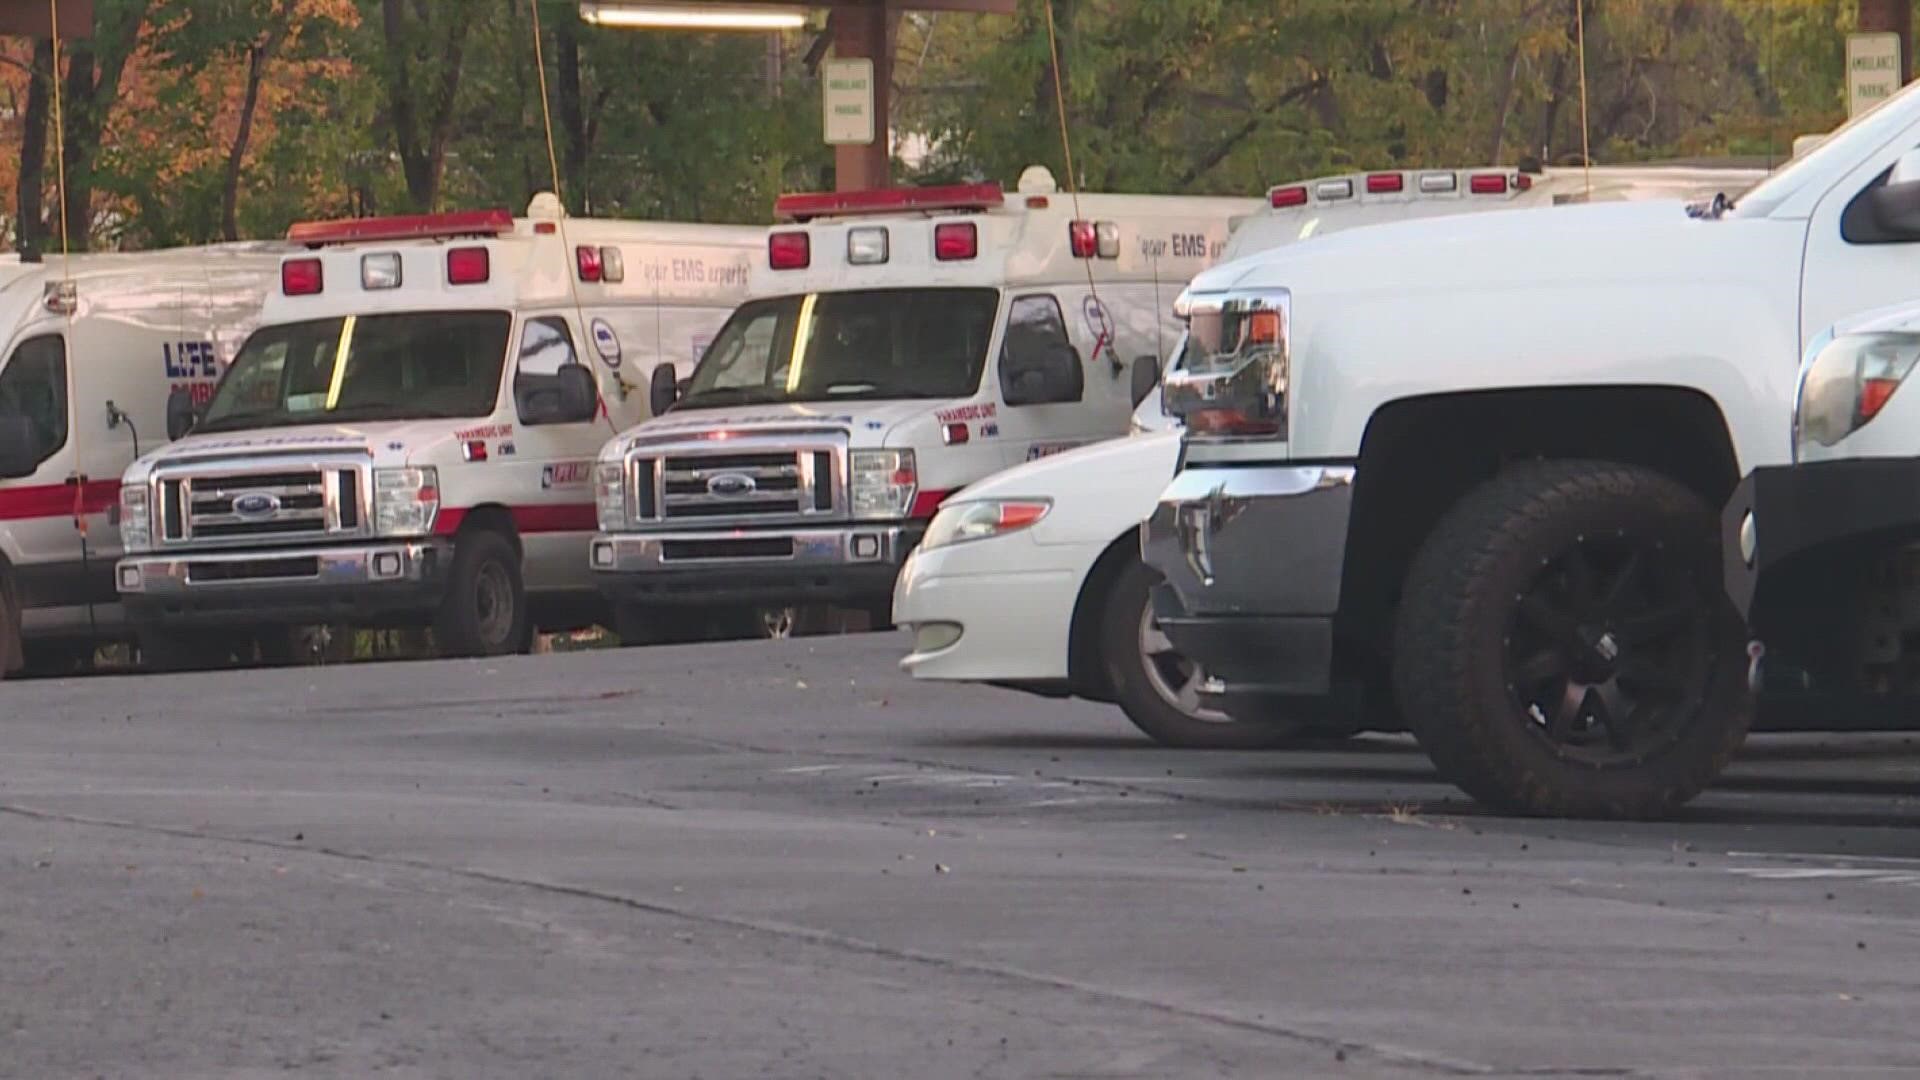 CAFMA has been critical of AMR's response times, claiming they've transported patients themselves, because AMR's ambulances are not available.